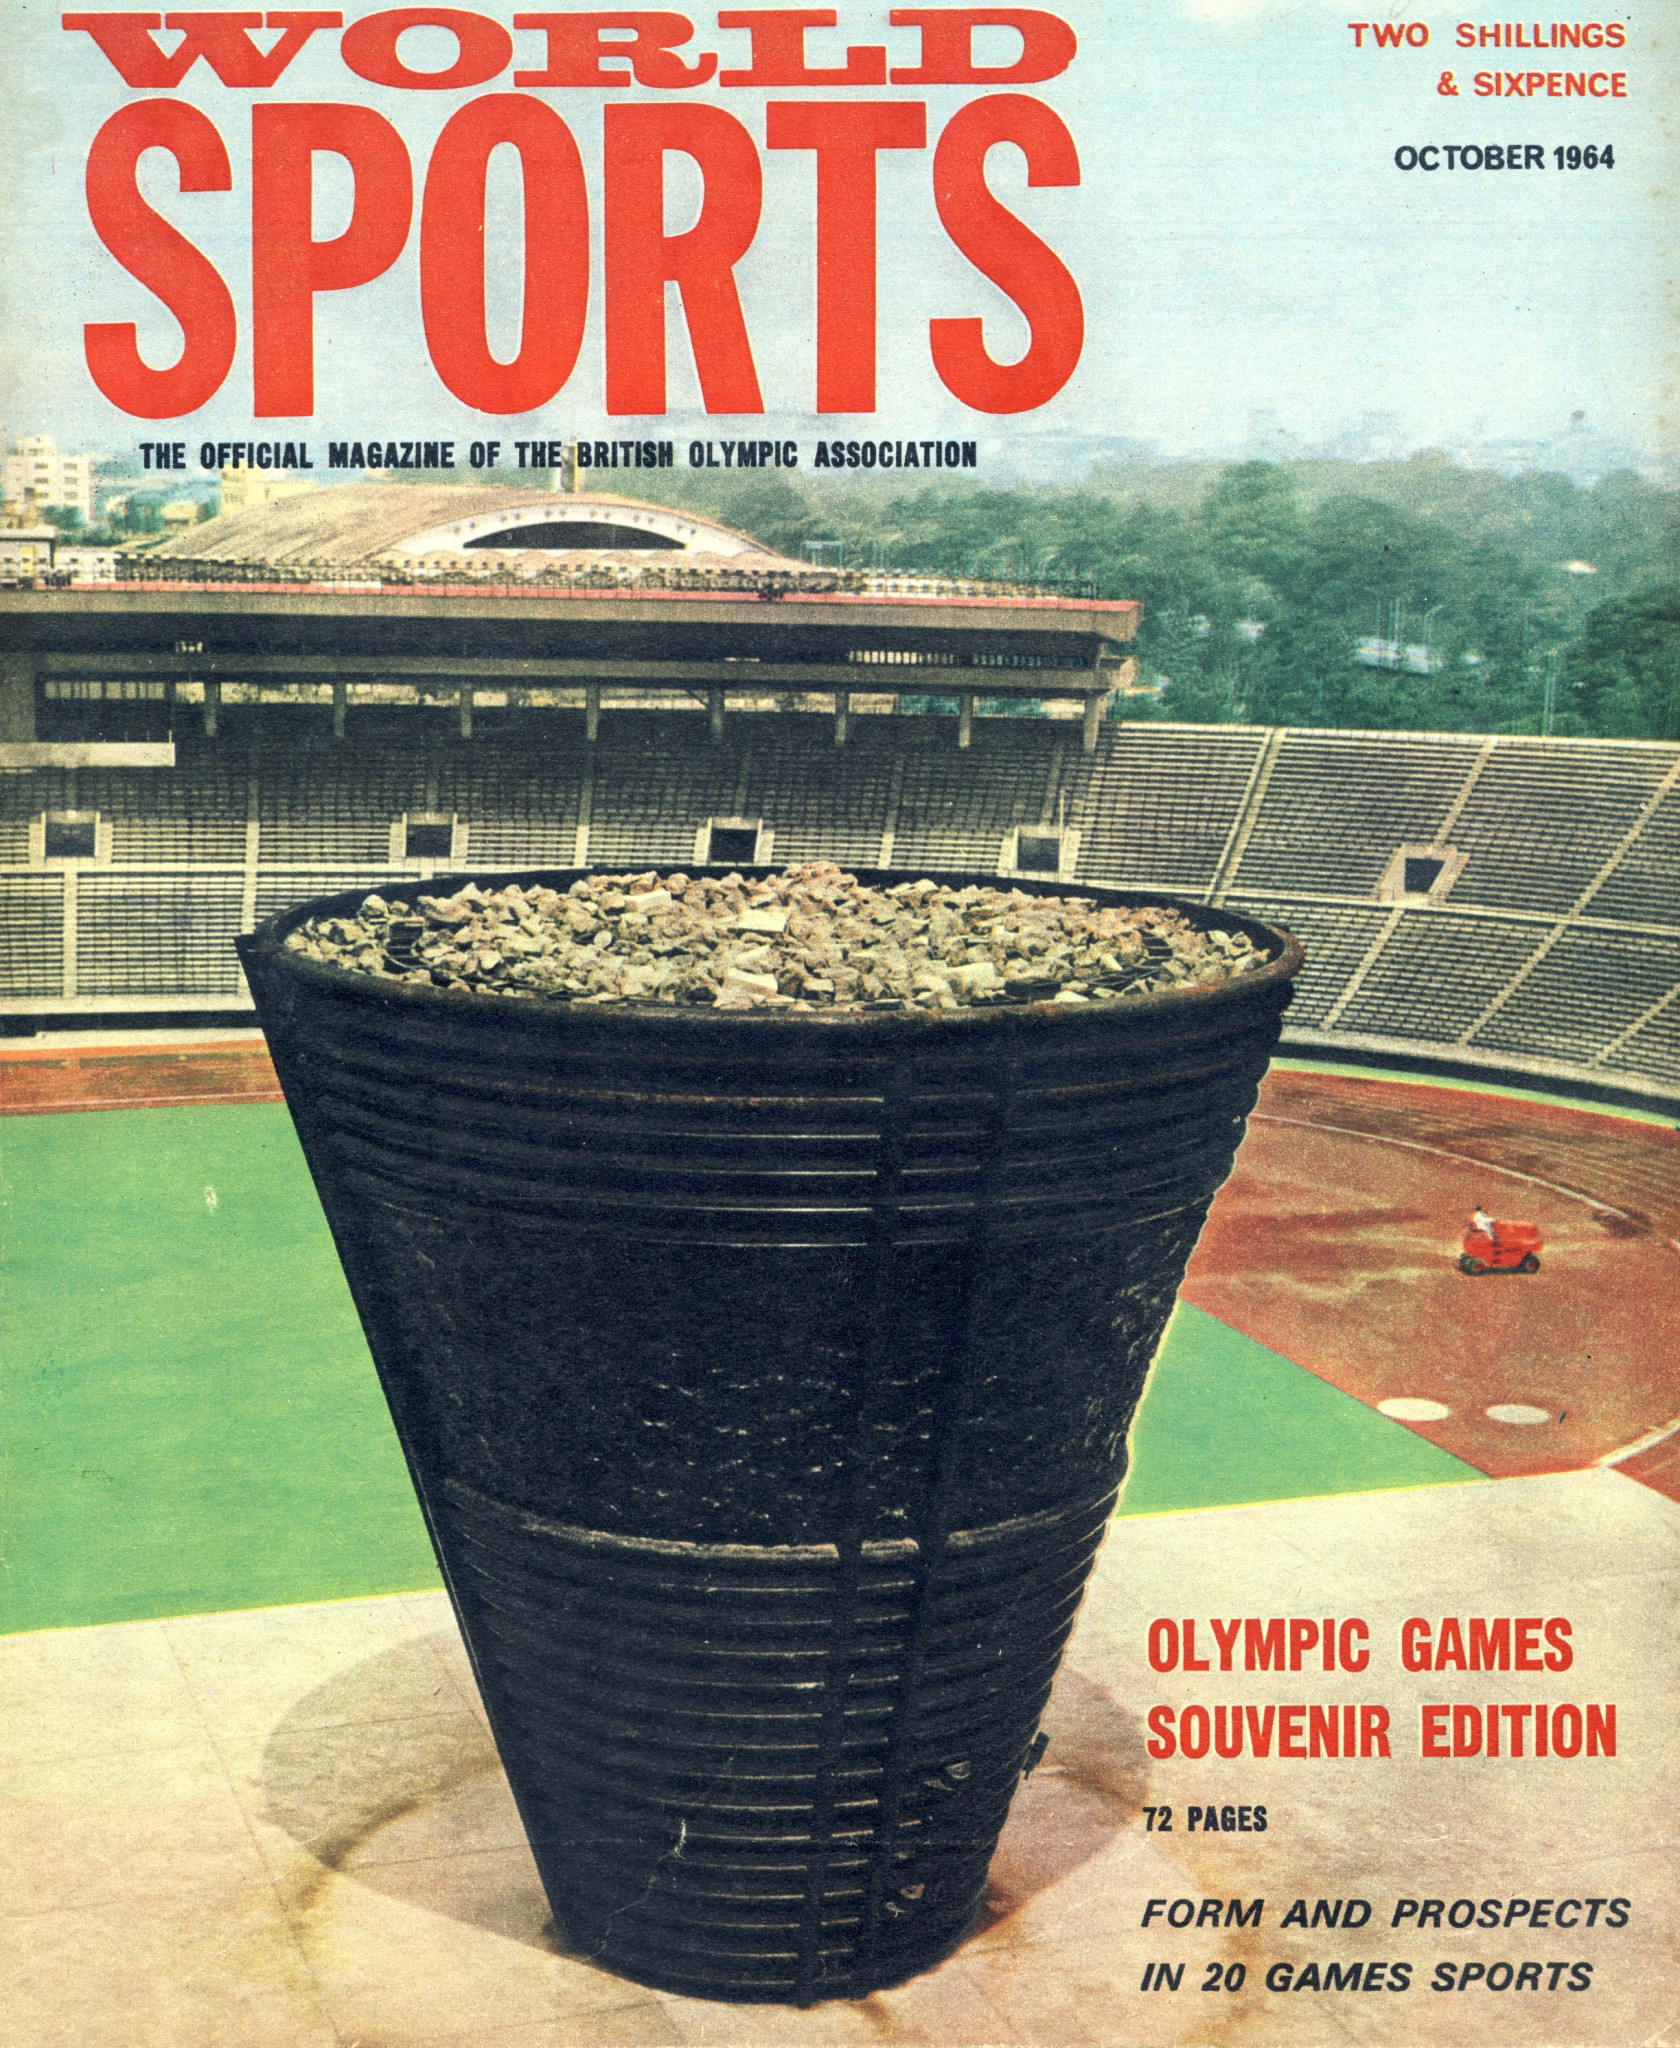 The cauldron from the Tokyo 1964 Olympic Games is depicted in a magazine ©Philip Barker